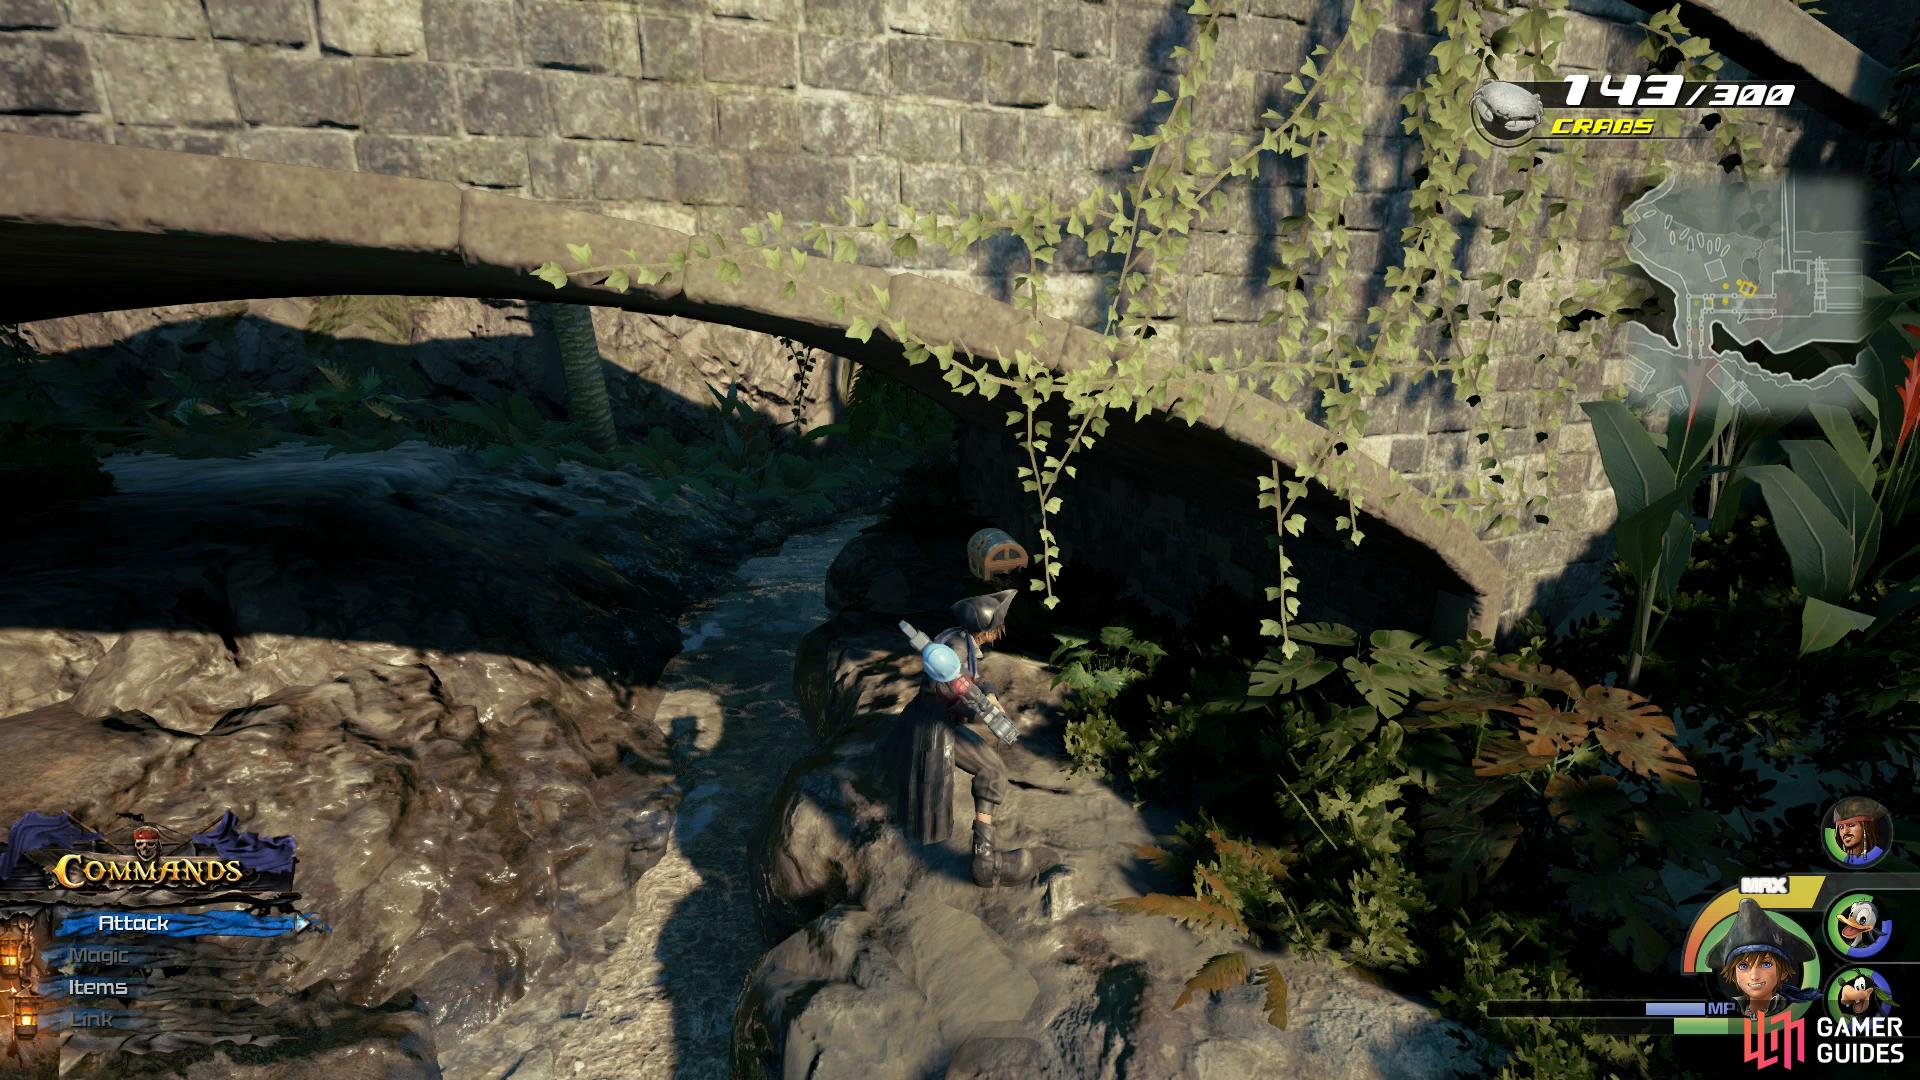 Look under the bridge to find this chest.